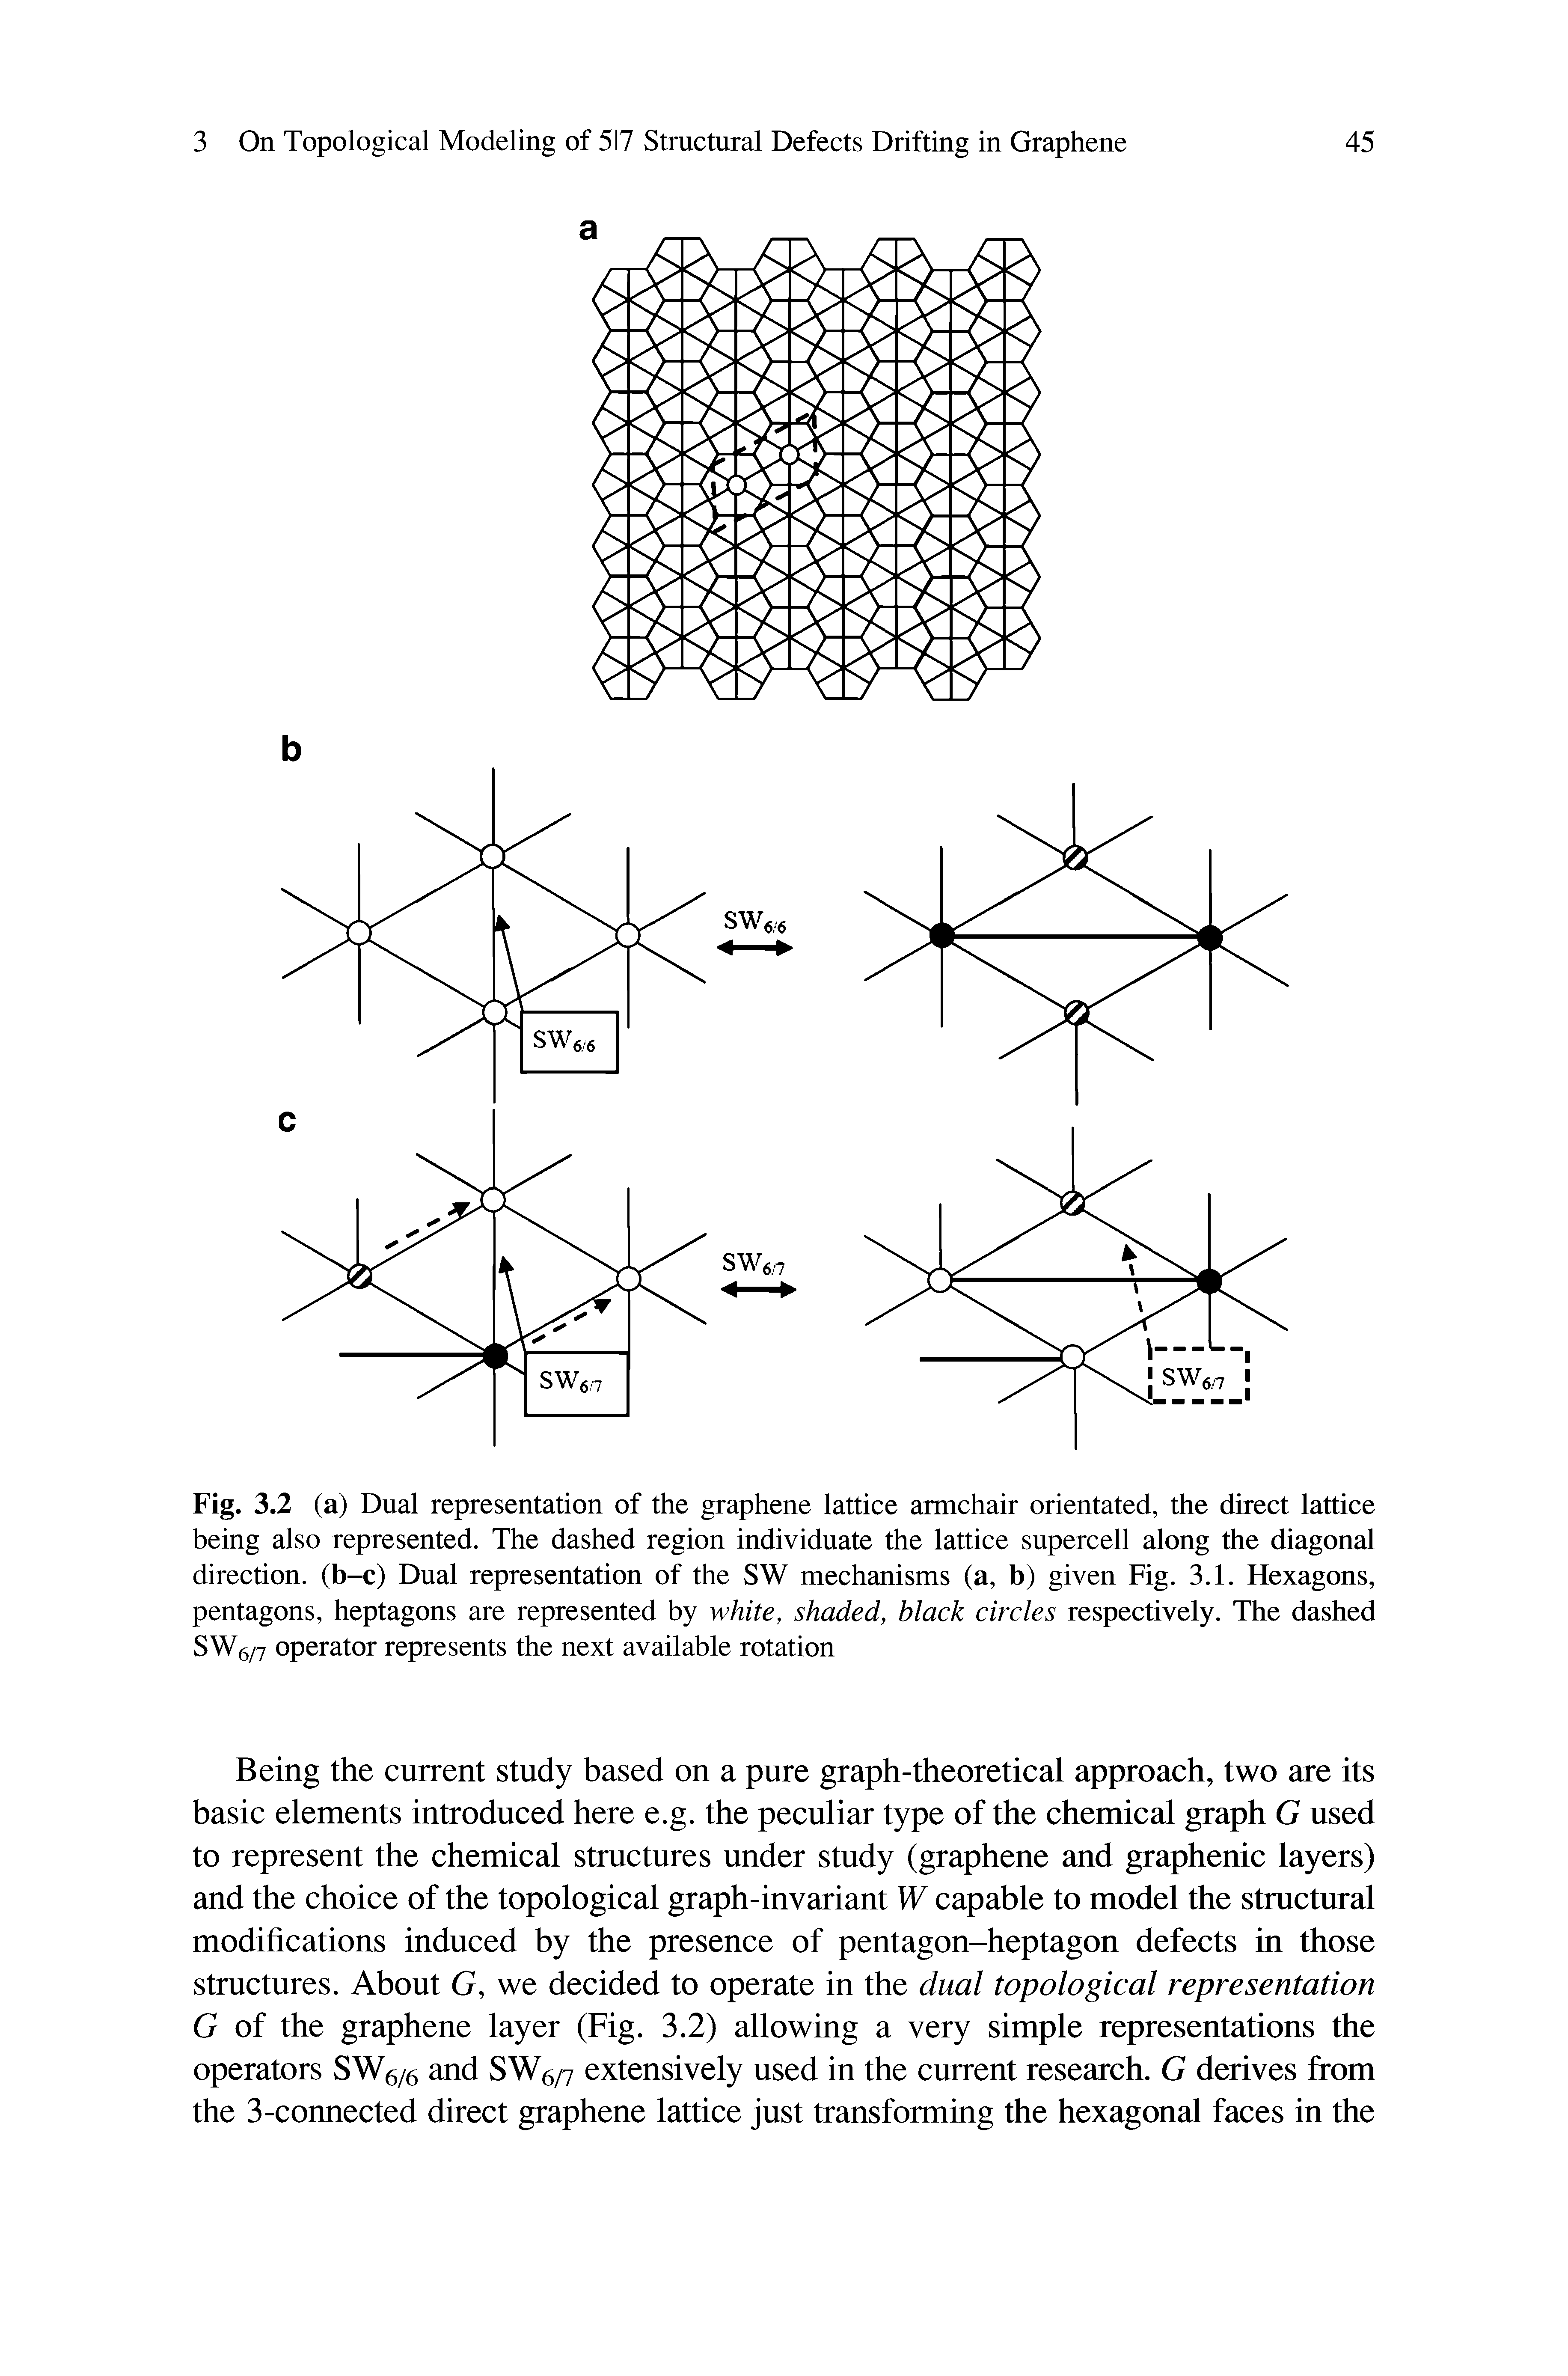 Fig. 3.2 (a) Dual representation of the graphene lattice armchair orientated, the direct lattice being also represented. The dashed region individuate the lattice supercell along the diagonal direction, (b-c) Dual representation of the SW mechanisms (a, b) given Fig. 3.1. Hexagons, pentagons, heptagons are represented by white, shaded, black circles respectively. The dashed SW6/7 operator represents the next available rotation...